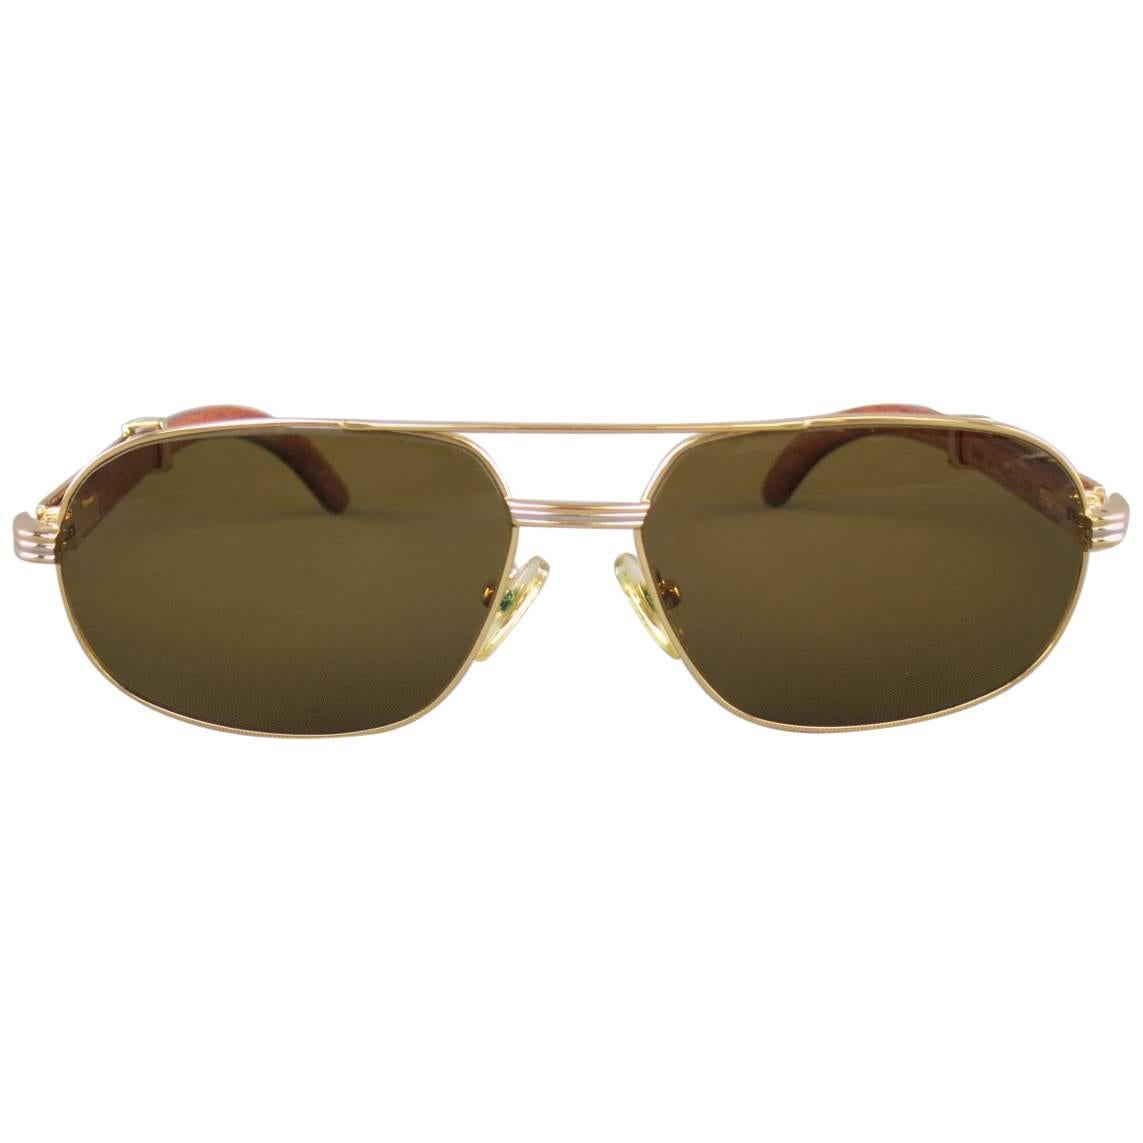 Cartier Sunglasses - Gold Tone Metal and Wood Multi Lens, 1990s 